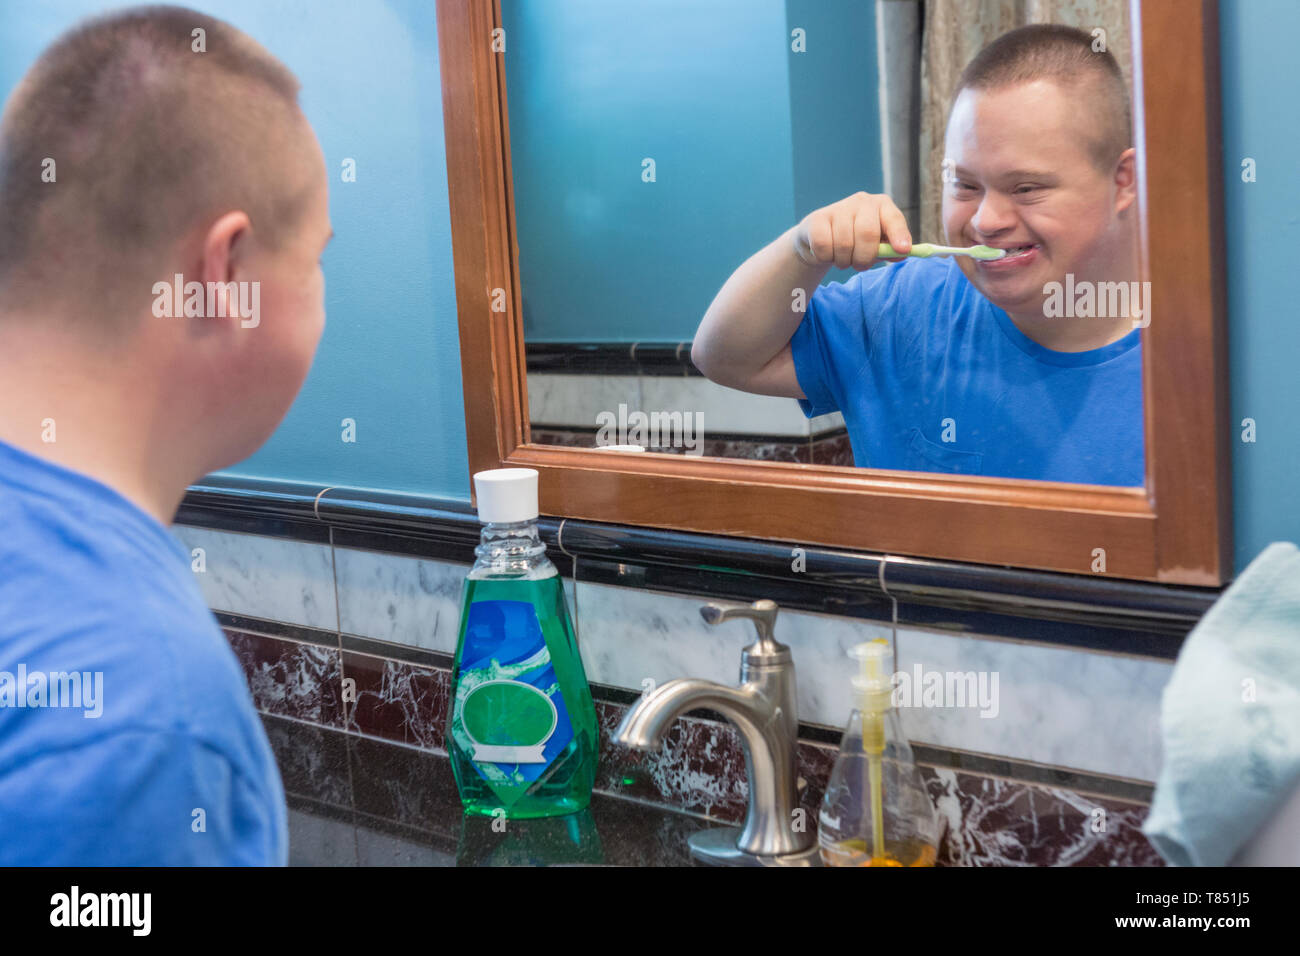 Teen with Down Syndrome brushing his teeth Stock Photo